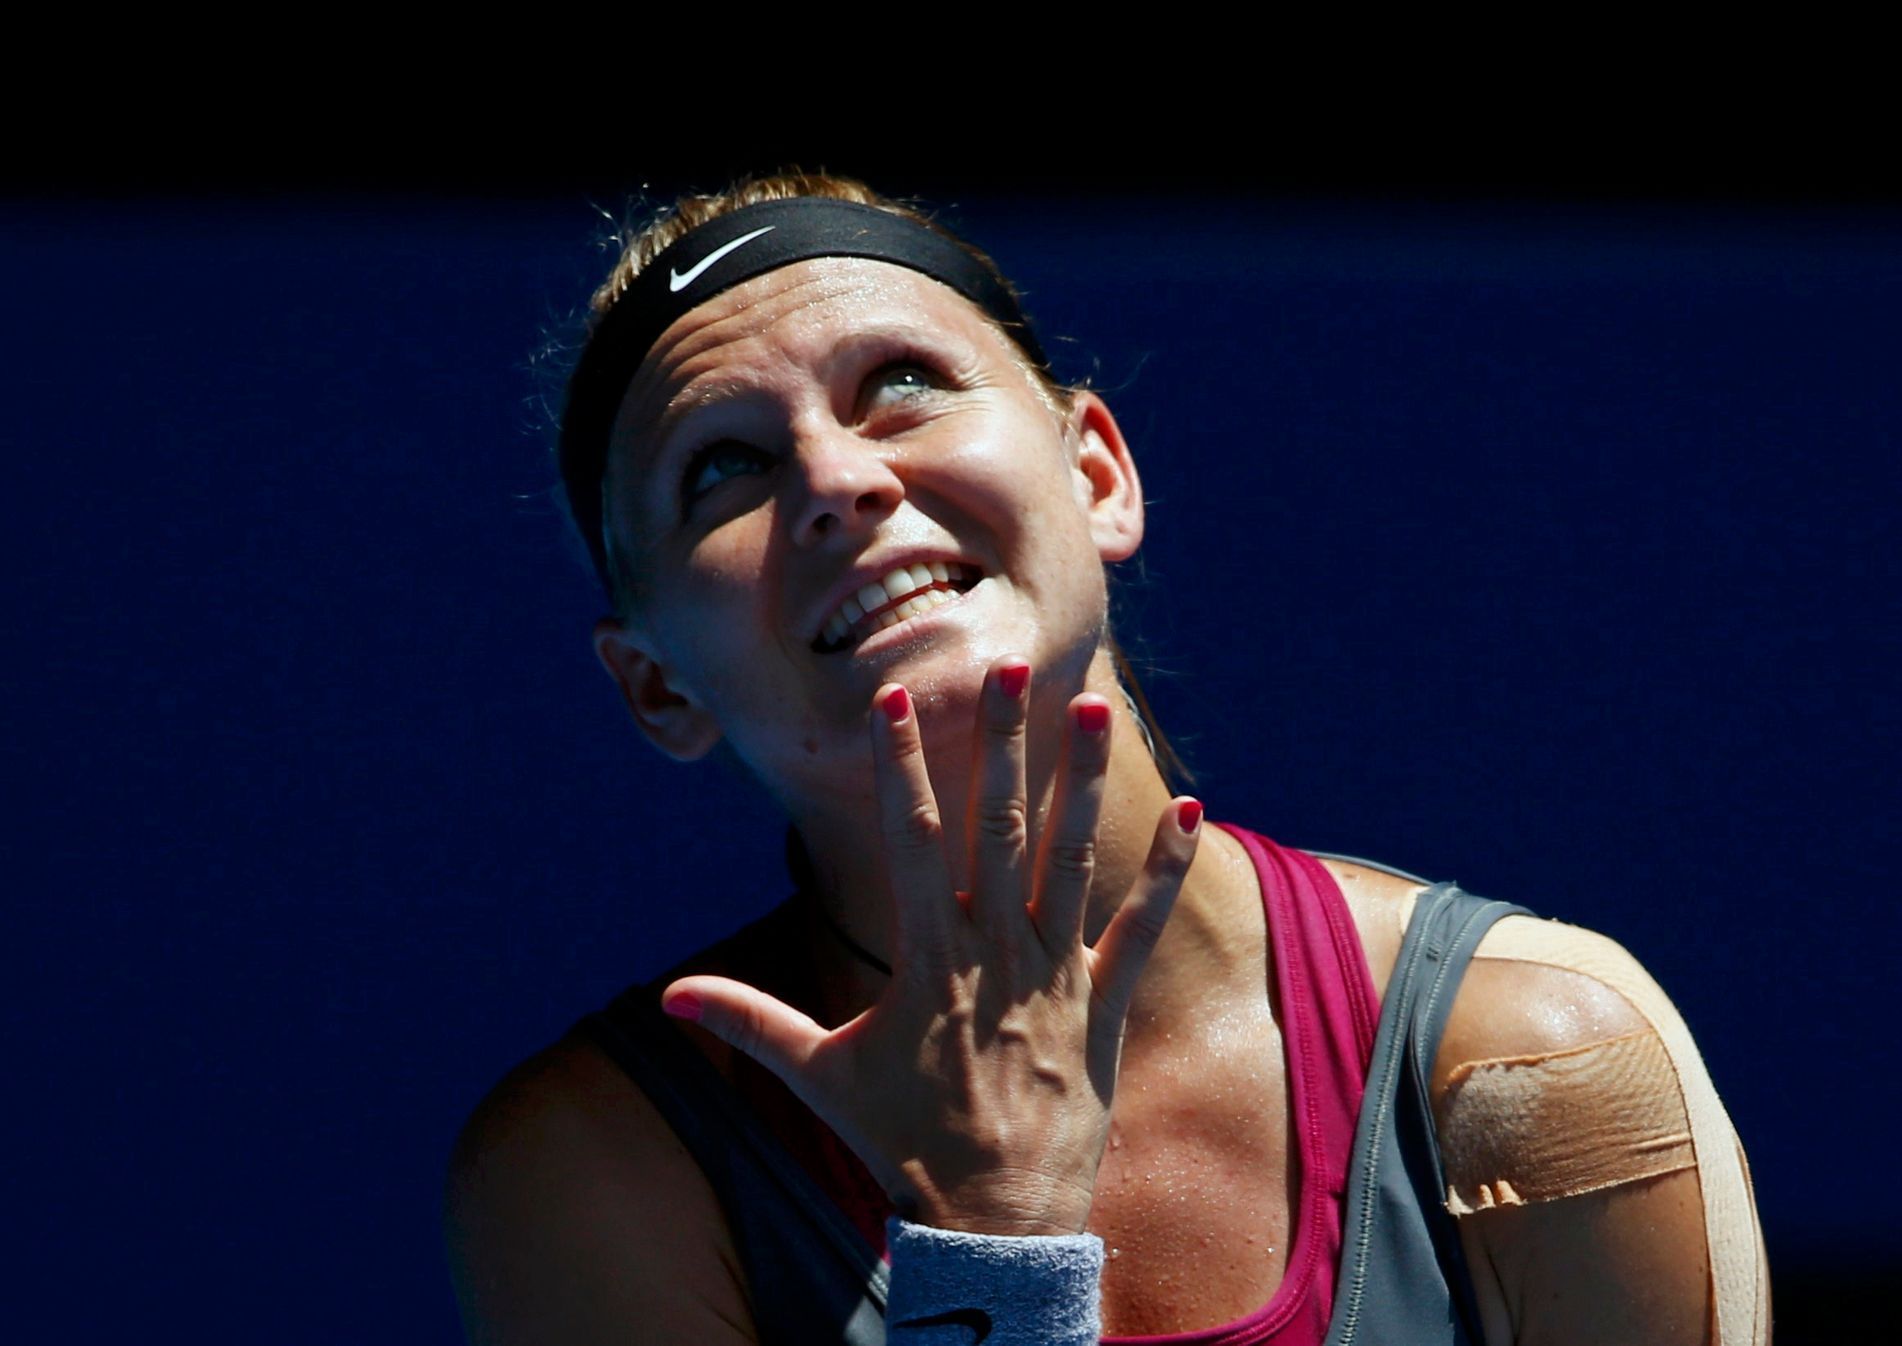 Lucie Safarova of the Czech Republic reacts during her women's singles match against Li Na of China at the Australian Open 2014 tennis tournament in Melbourne